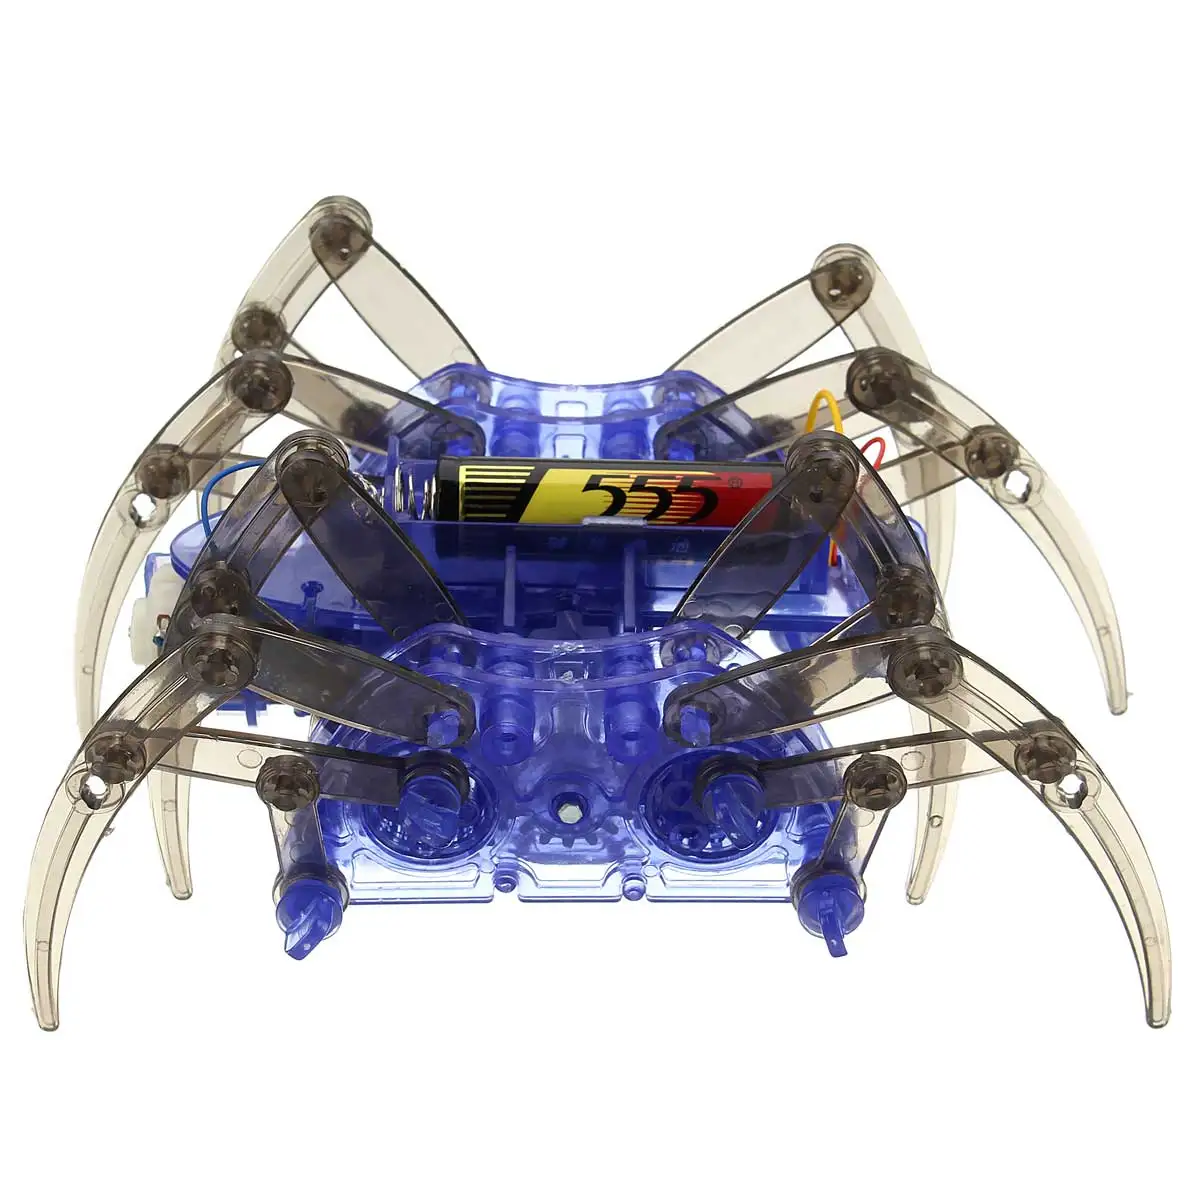 Spider Robot Intelligent Electric Toy Puzzle Assemble Educational DIY Kit Toys for sale online 